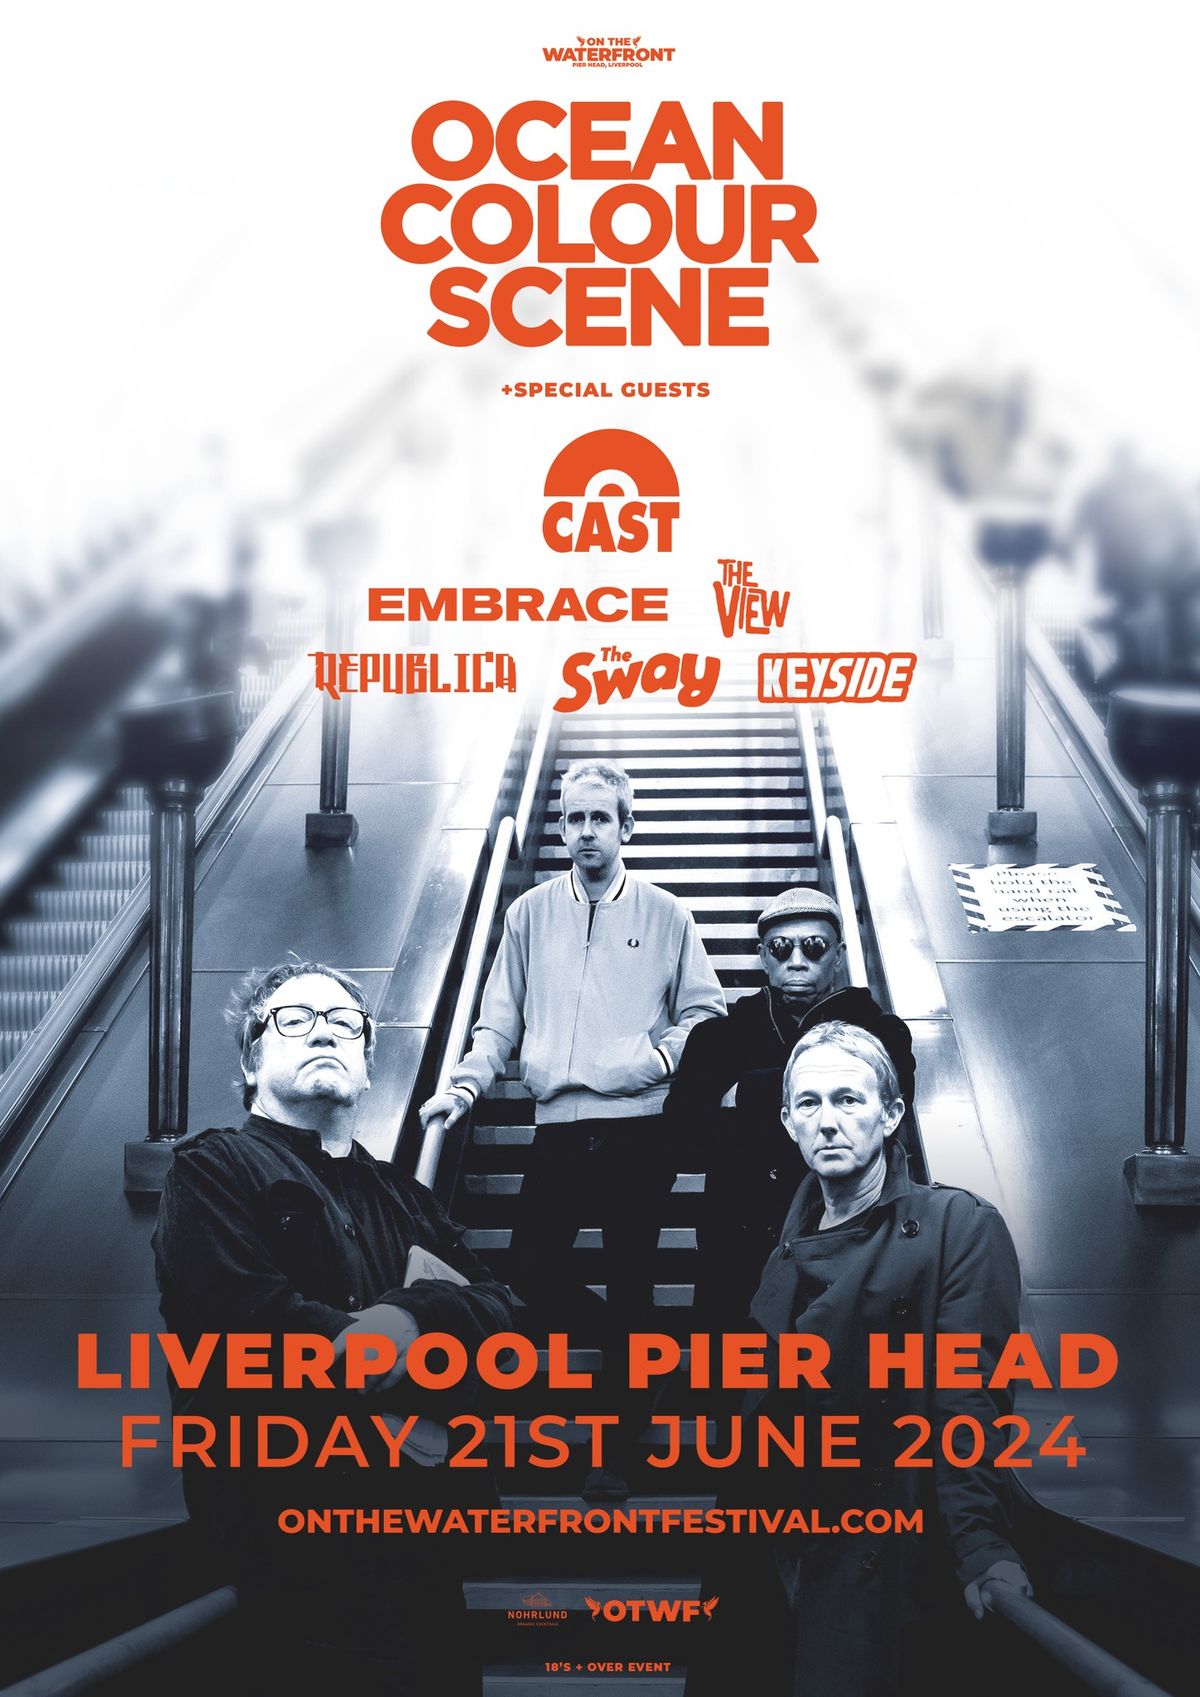 On the Waterfront Festival presents Ocean Colour Scene, Friday 21st June 2024 - Pier Head, Liverpool